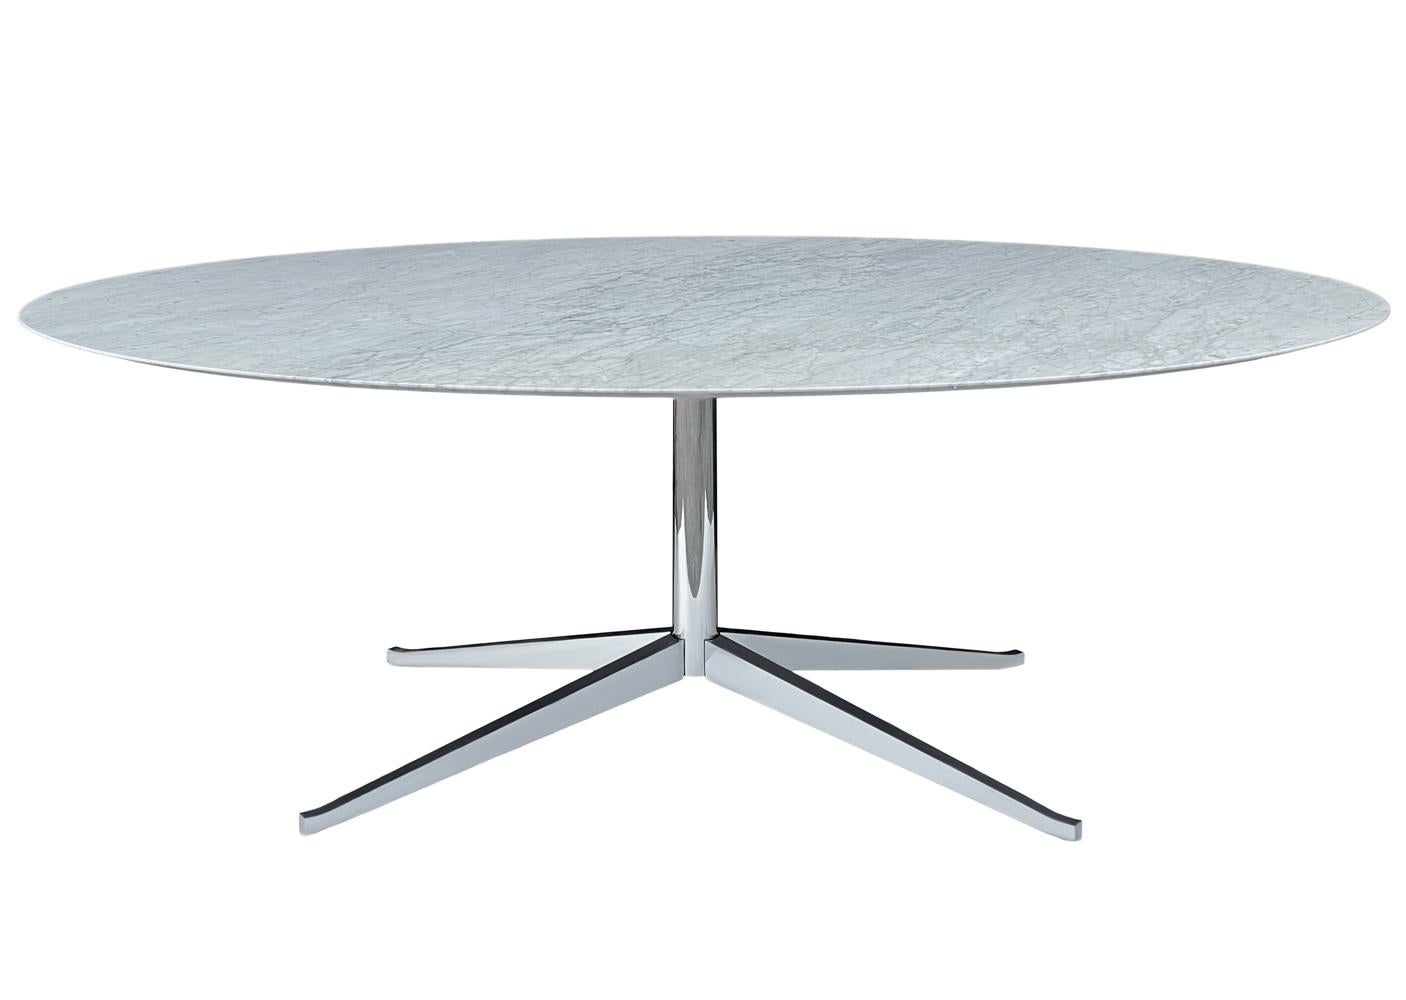 Late 20th Century Mid-Century Modern Oval Dining Table or Desk by Florence Knoll in Carrara Marble For Sale